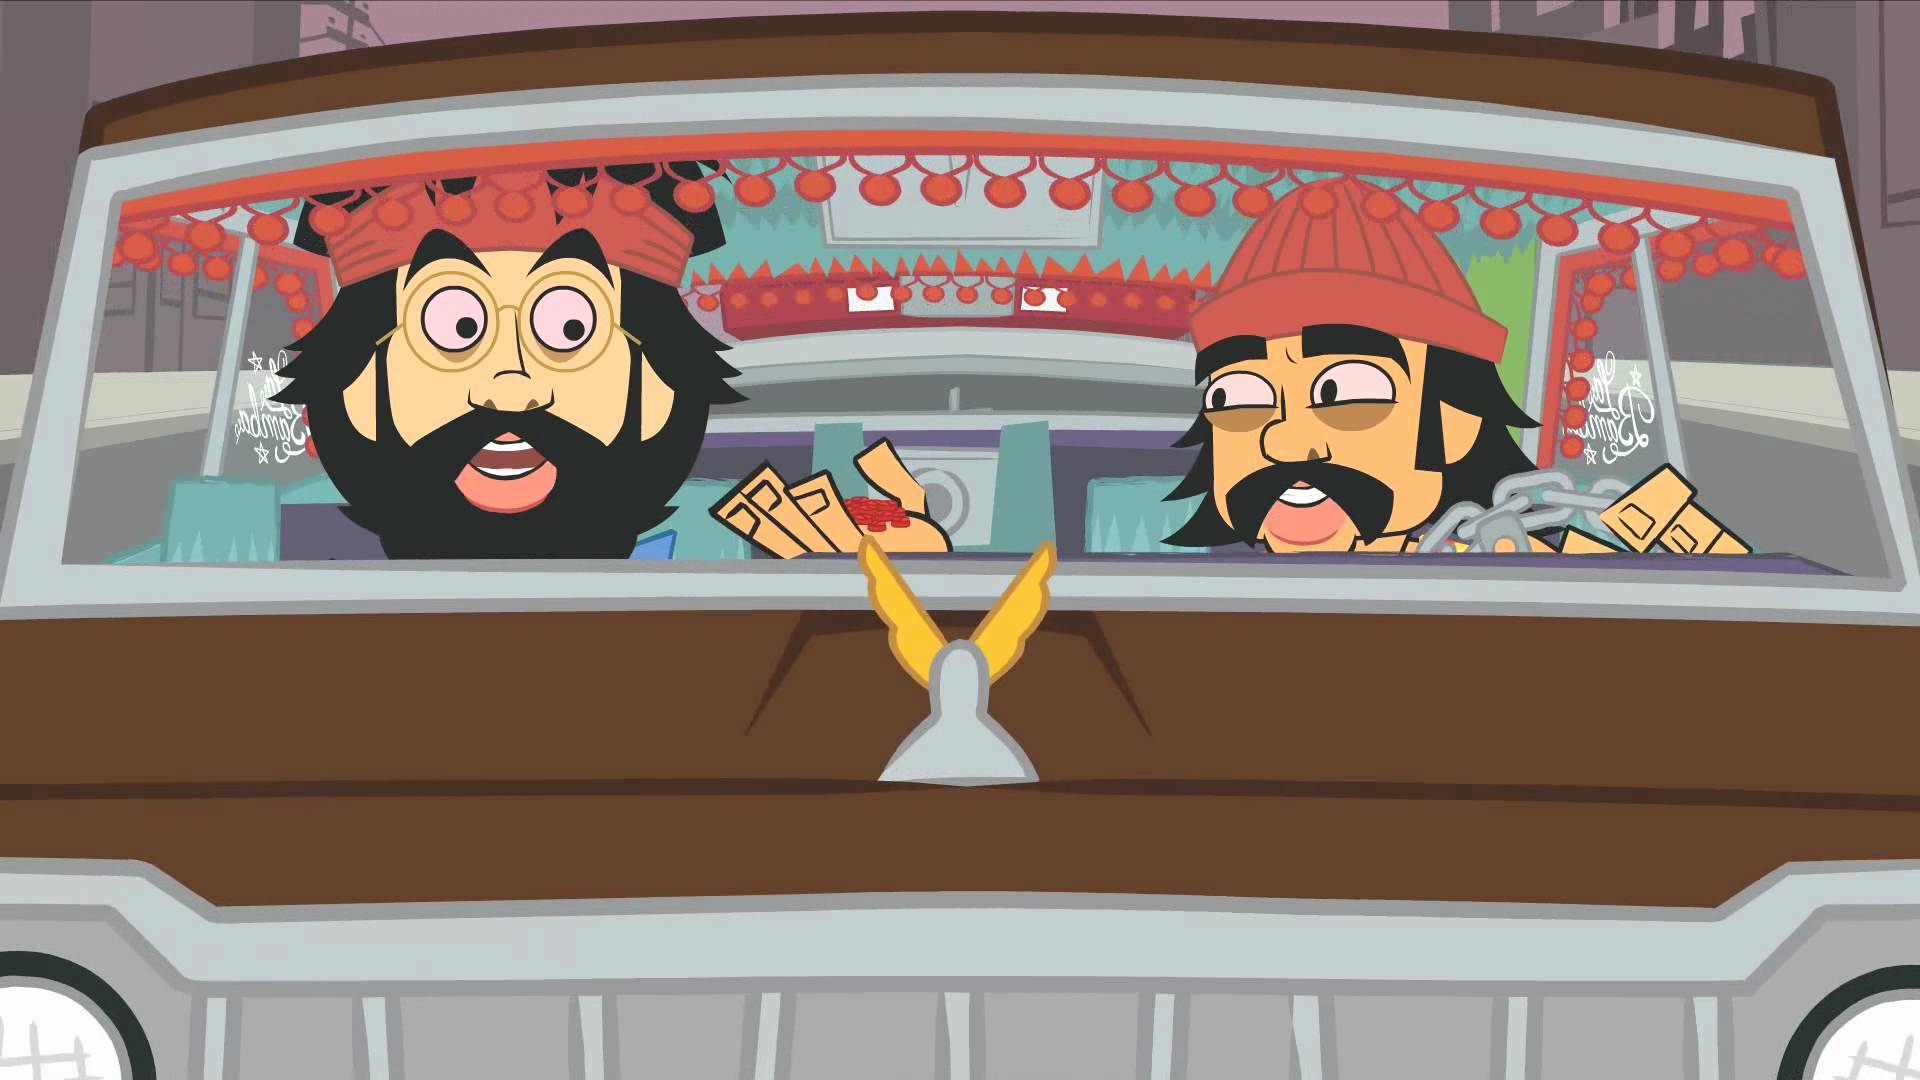 Cheech and Chong's Animated Movie - Trailer #1 - YouTube